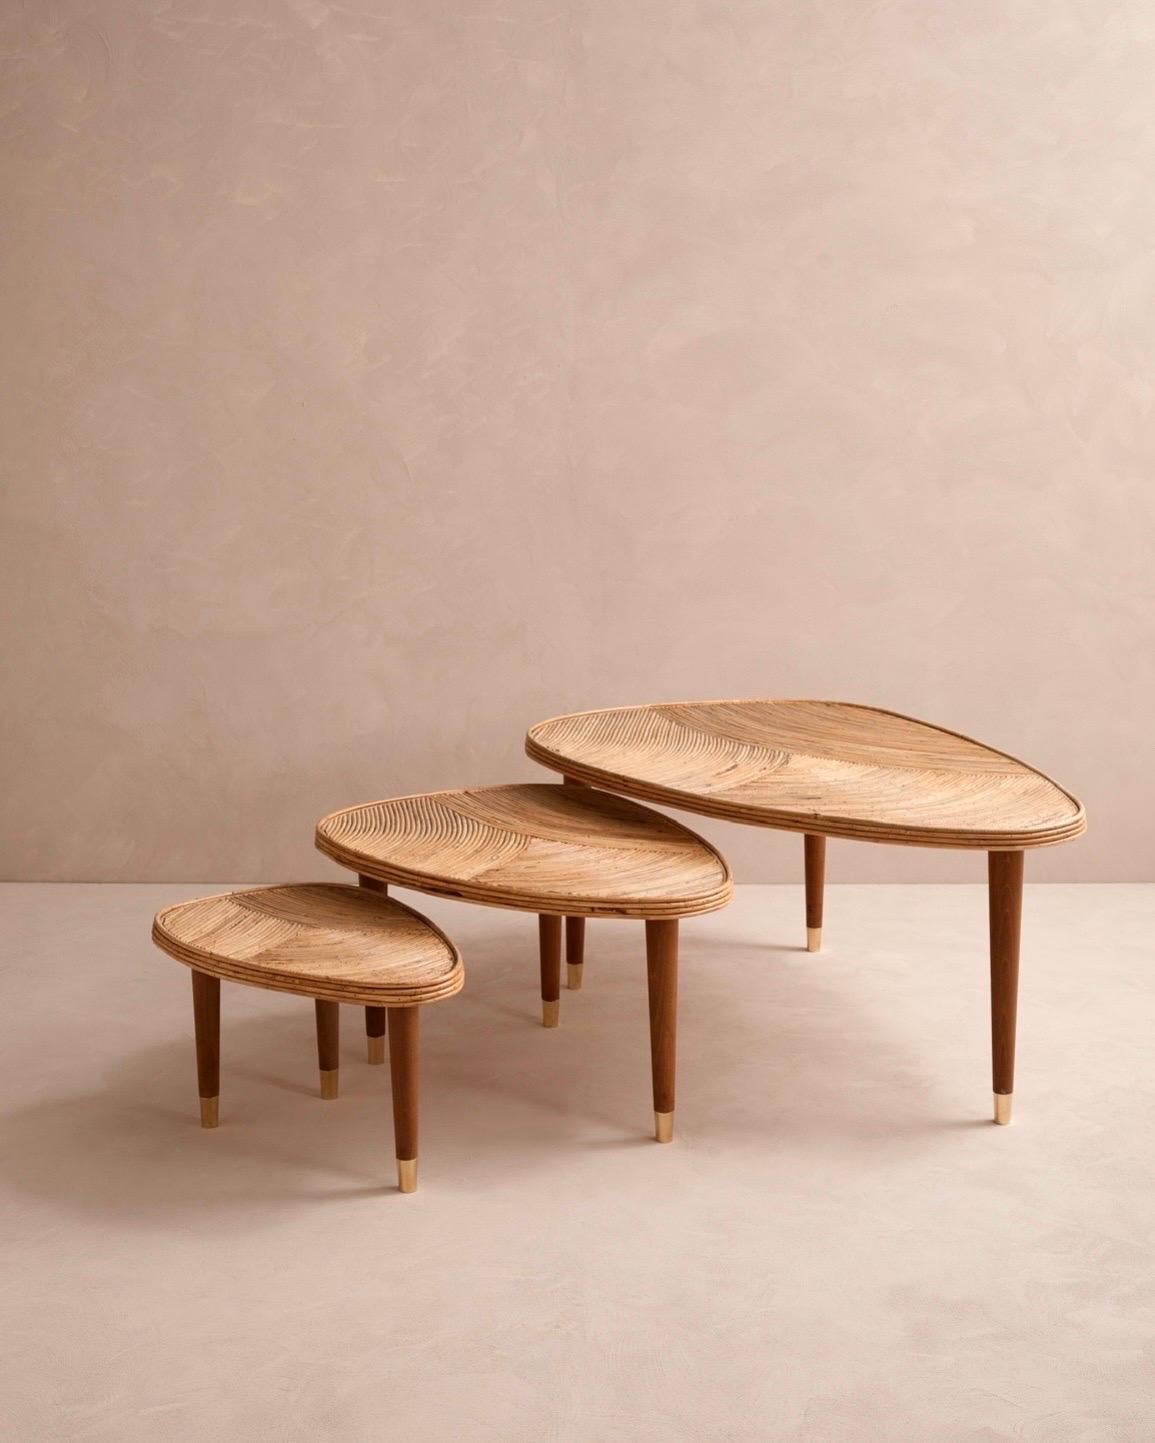 3 beautiful bamboo tables made in highest quality and manufactured in Italy. 
Largest: 47 inches wide, 32 inches deep, 20 inches high
Medium size: 31.5 inches wide, 24 inches deep, 16.5 inches high
Small size: 23.6 wide, 16 inches deep, 14 inches